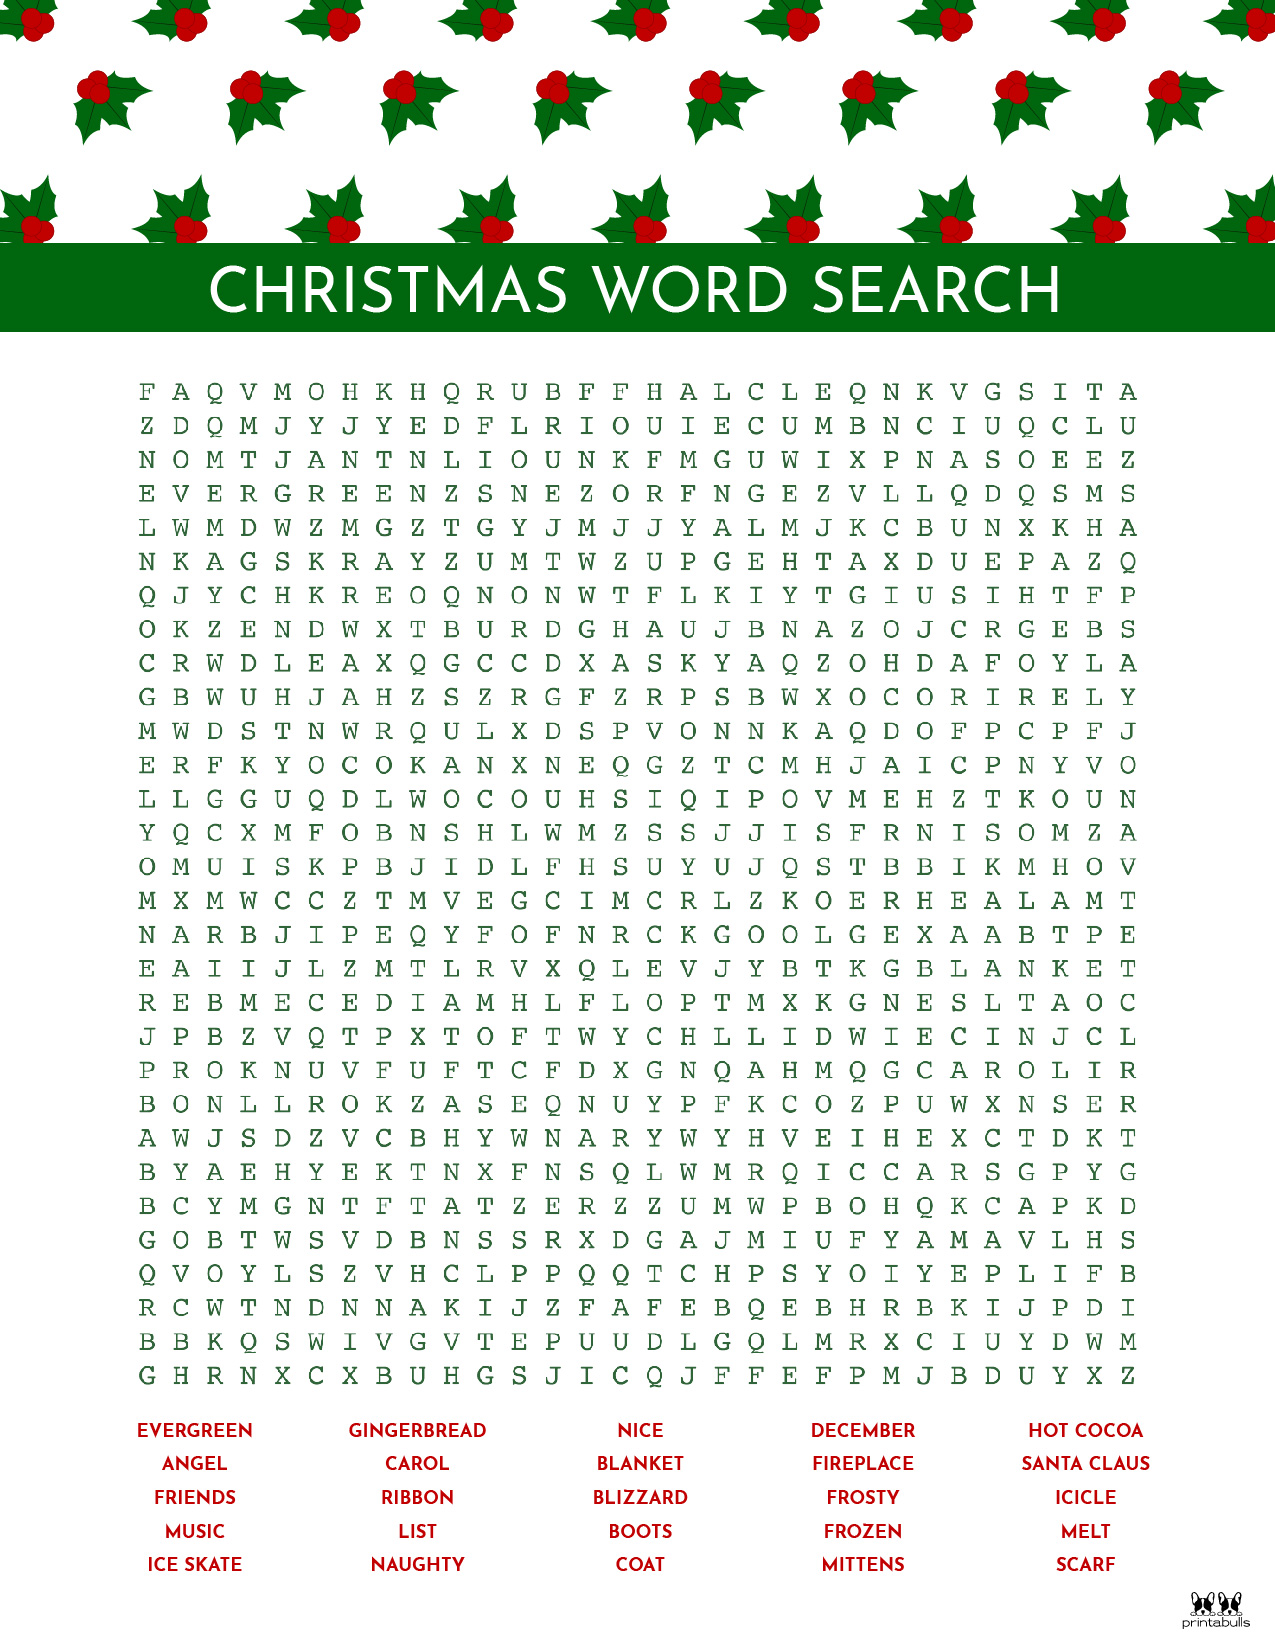 Holiday Word Searches Printable Web Printable Word Search Puzzles.